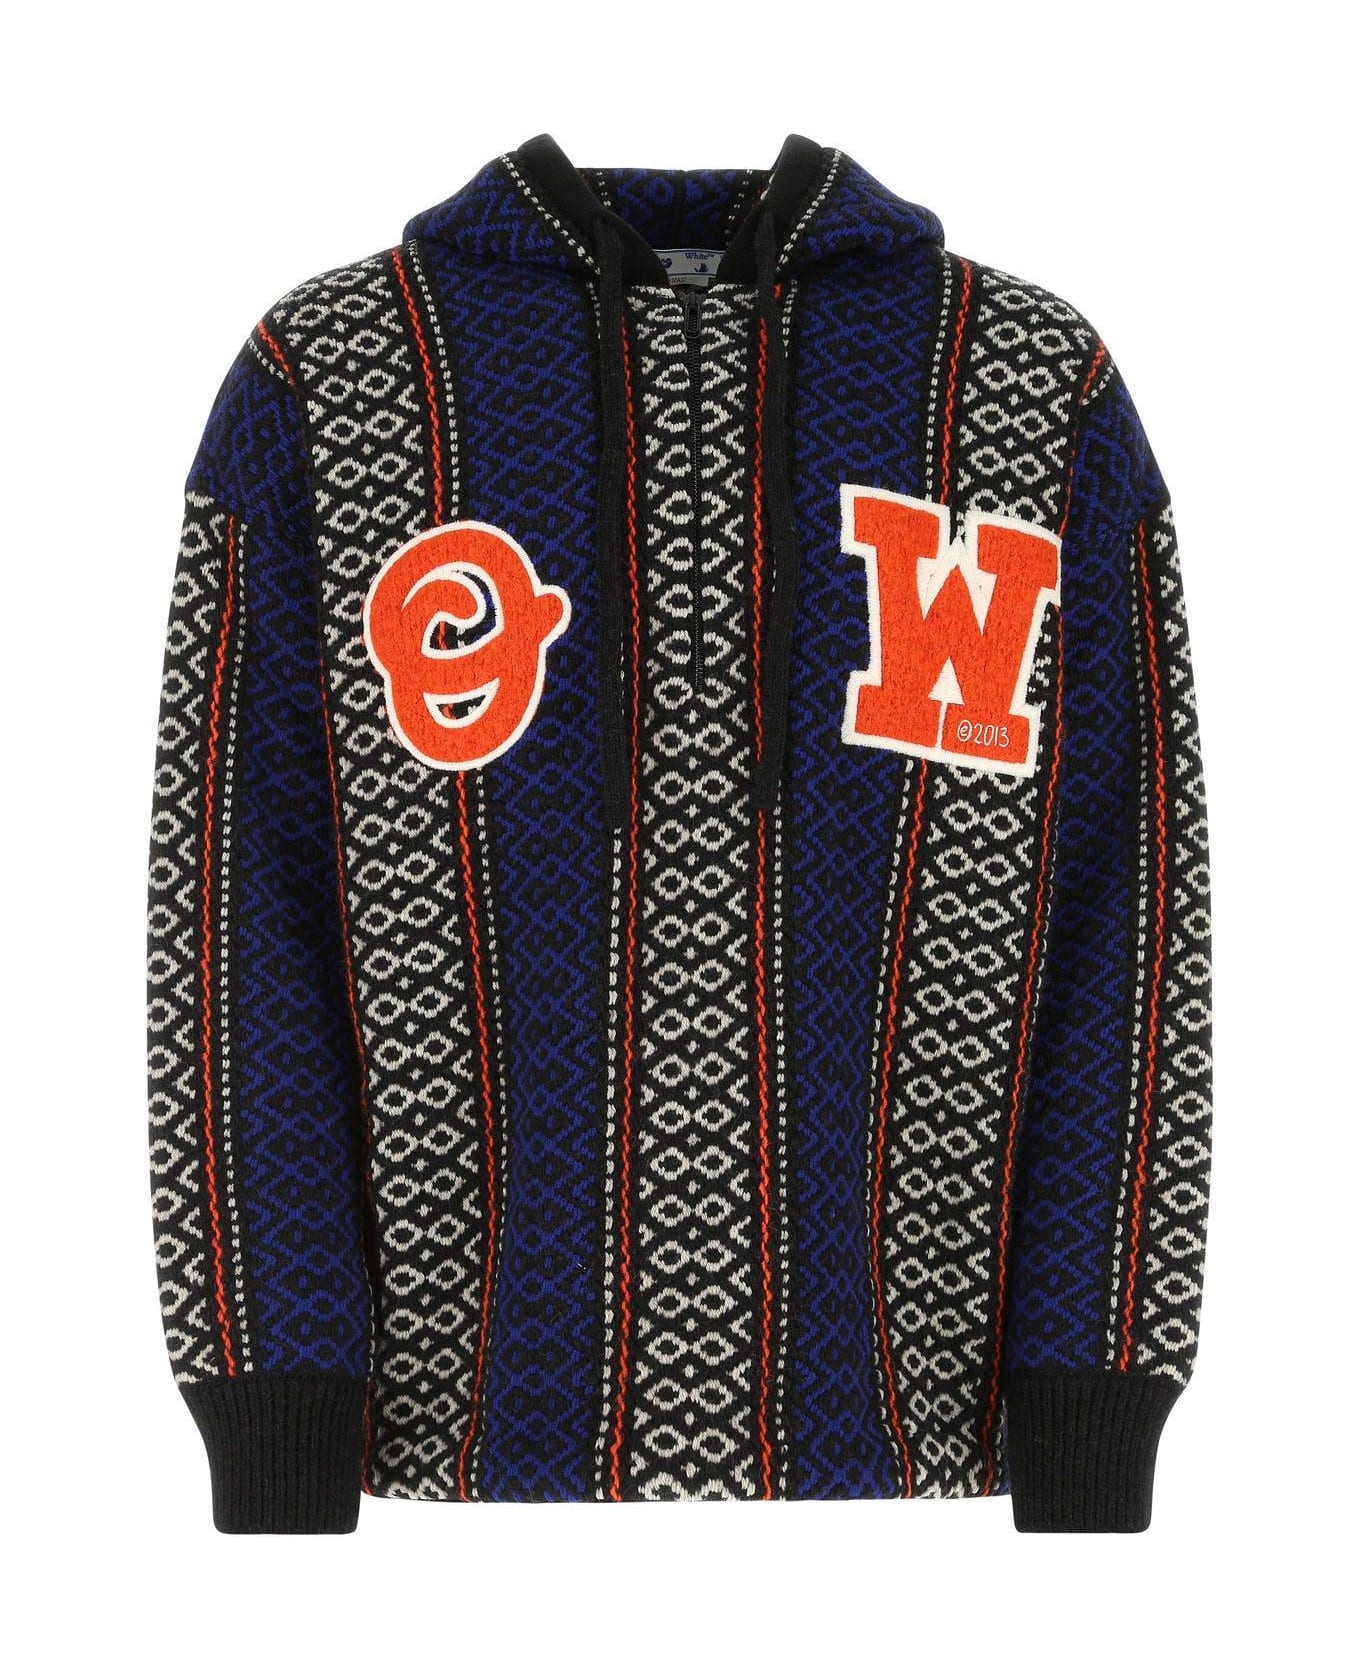 Off-White Embroidered Wool Blend Oversize Sweater - Brown